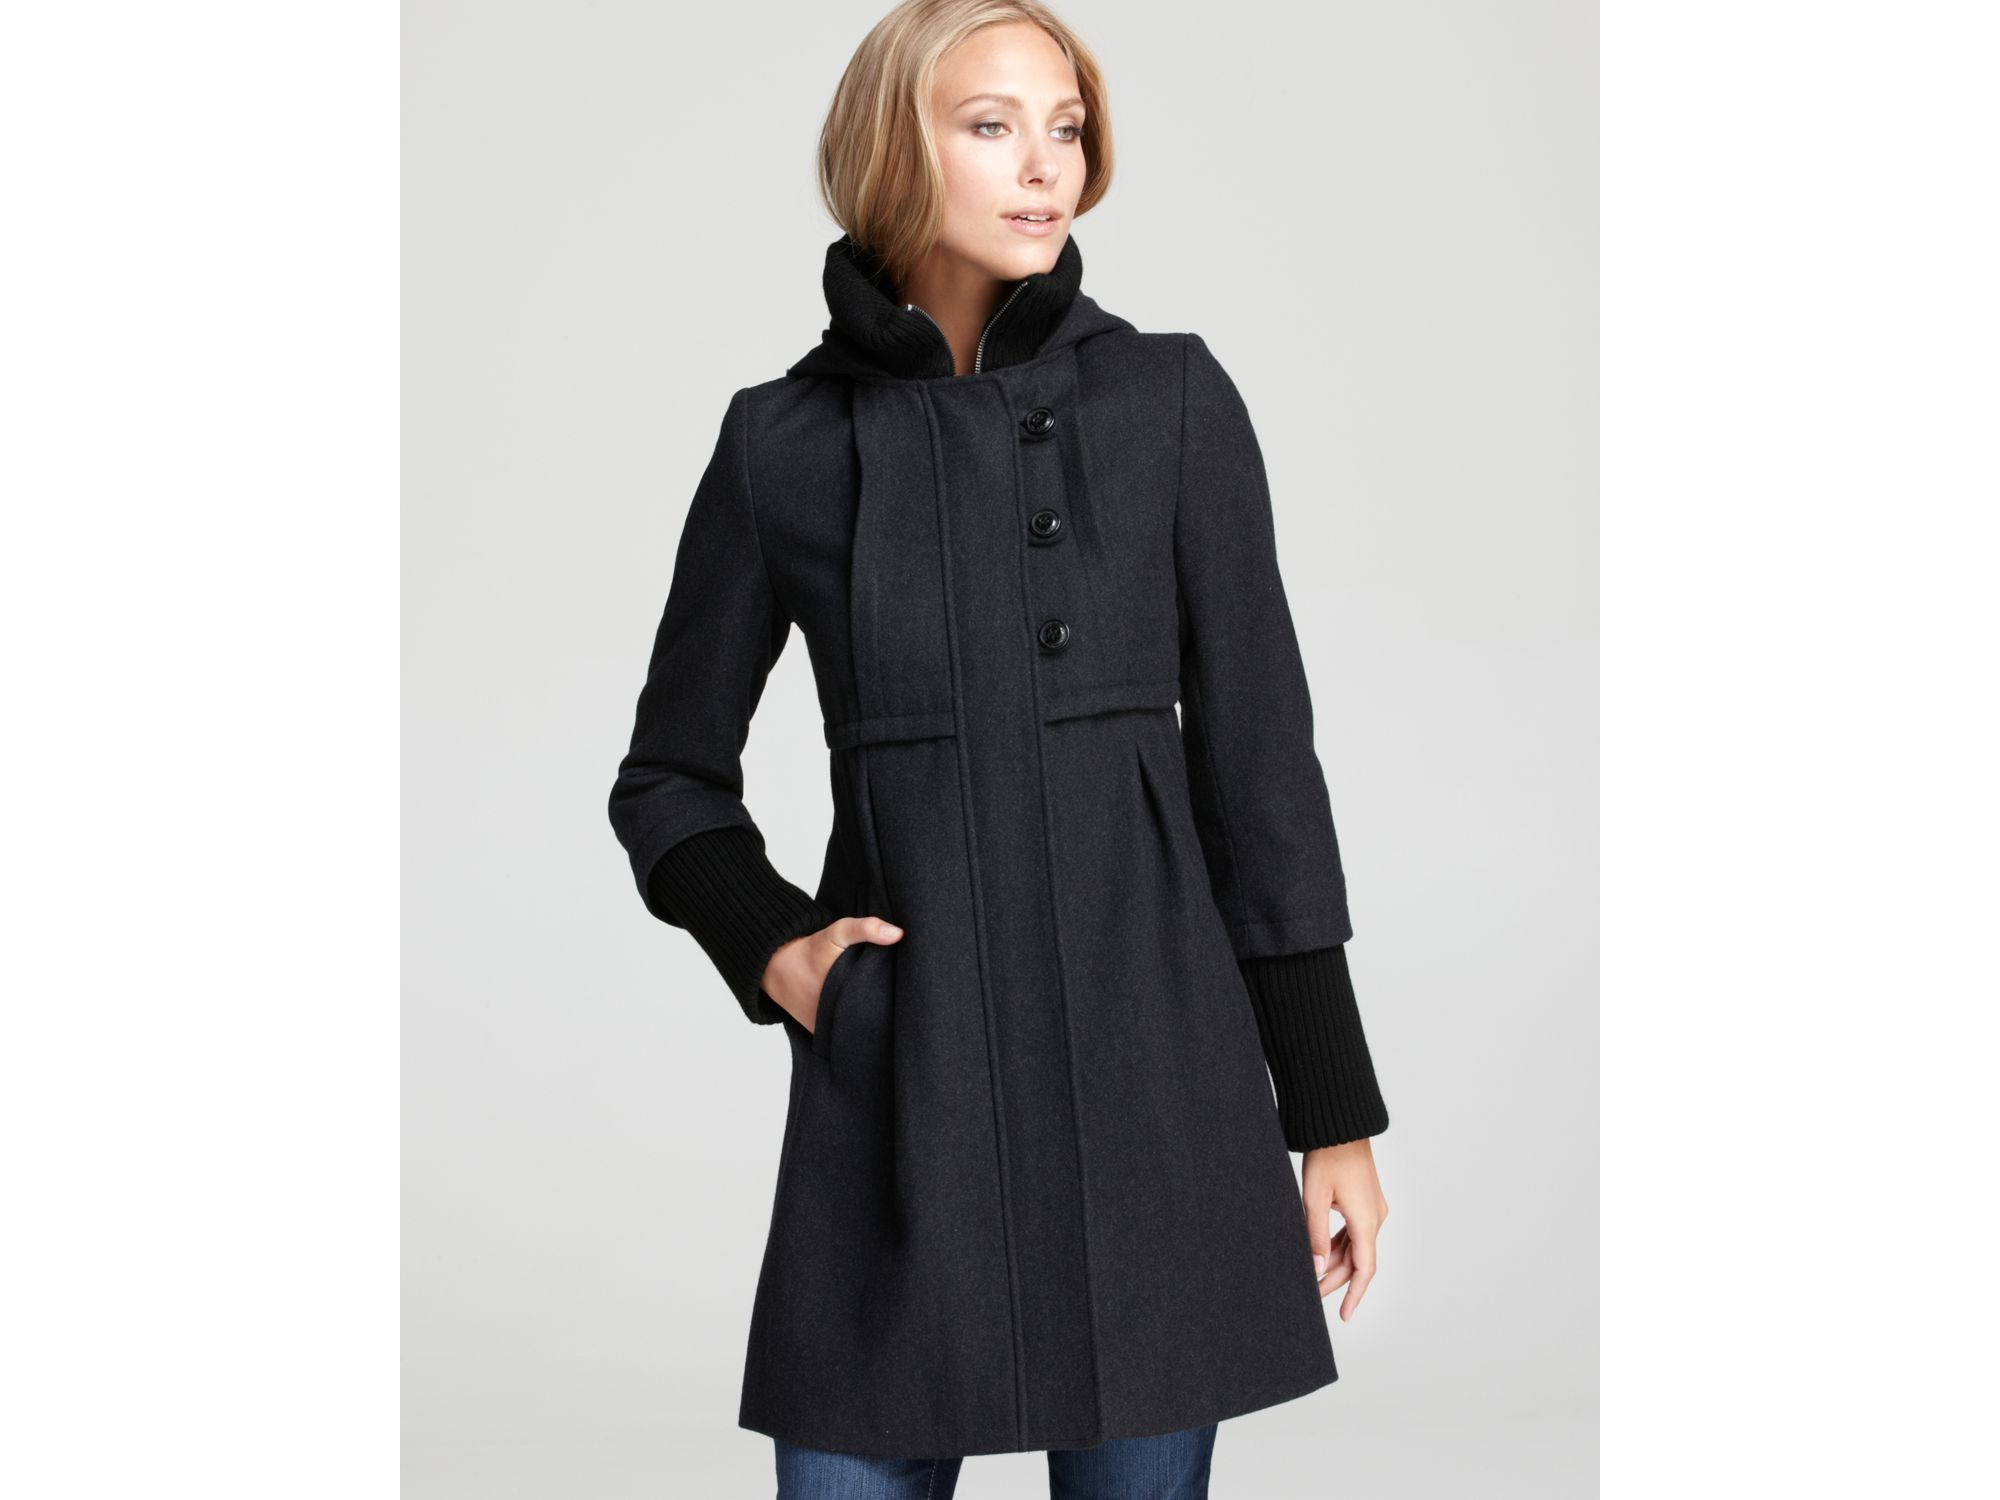 DKNY Babydoll Coat With Knit Collar & Cuffs in Charcoal (Gray) - Lyst